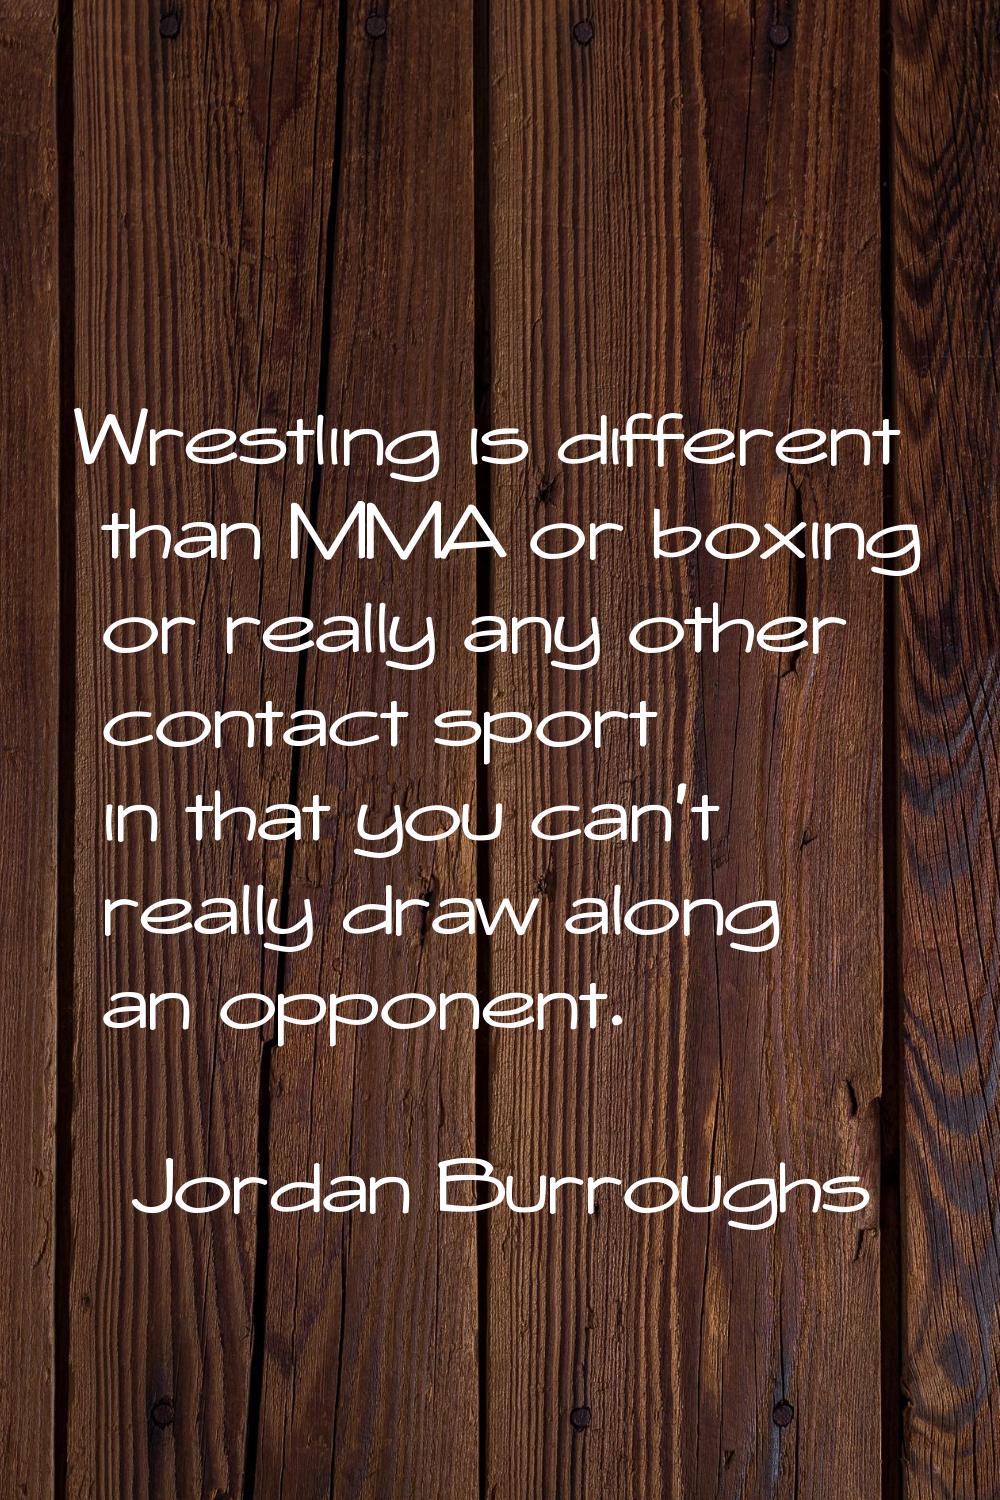 Wrestling is different than MMA or boxing or really any other contact sport in that you can't reall